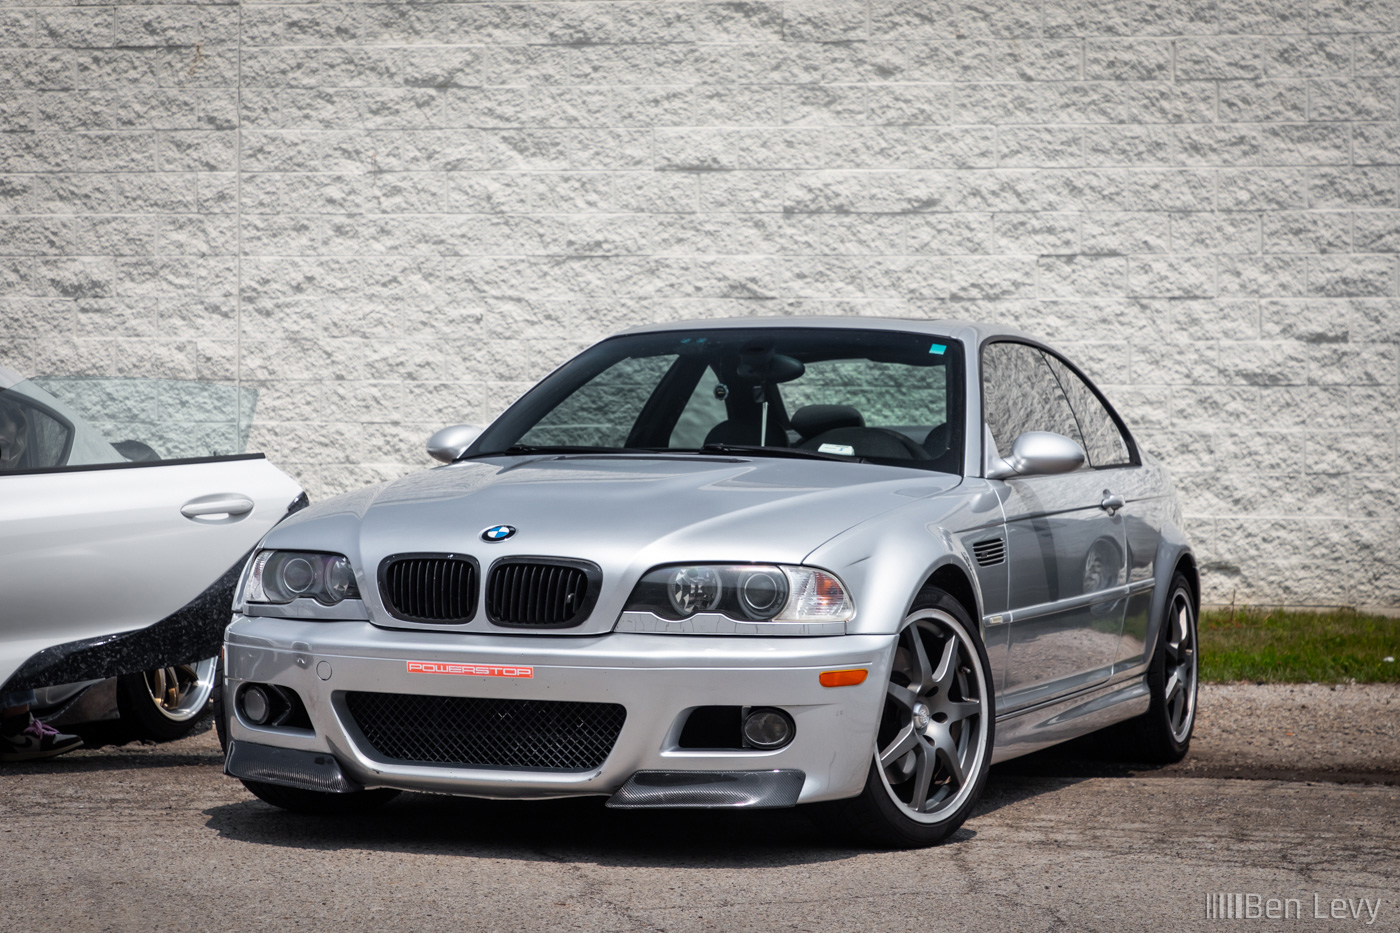 Silver E46 BMW M3 at the Sound Performance Open House